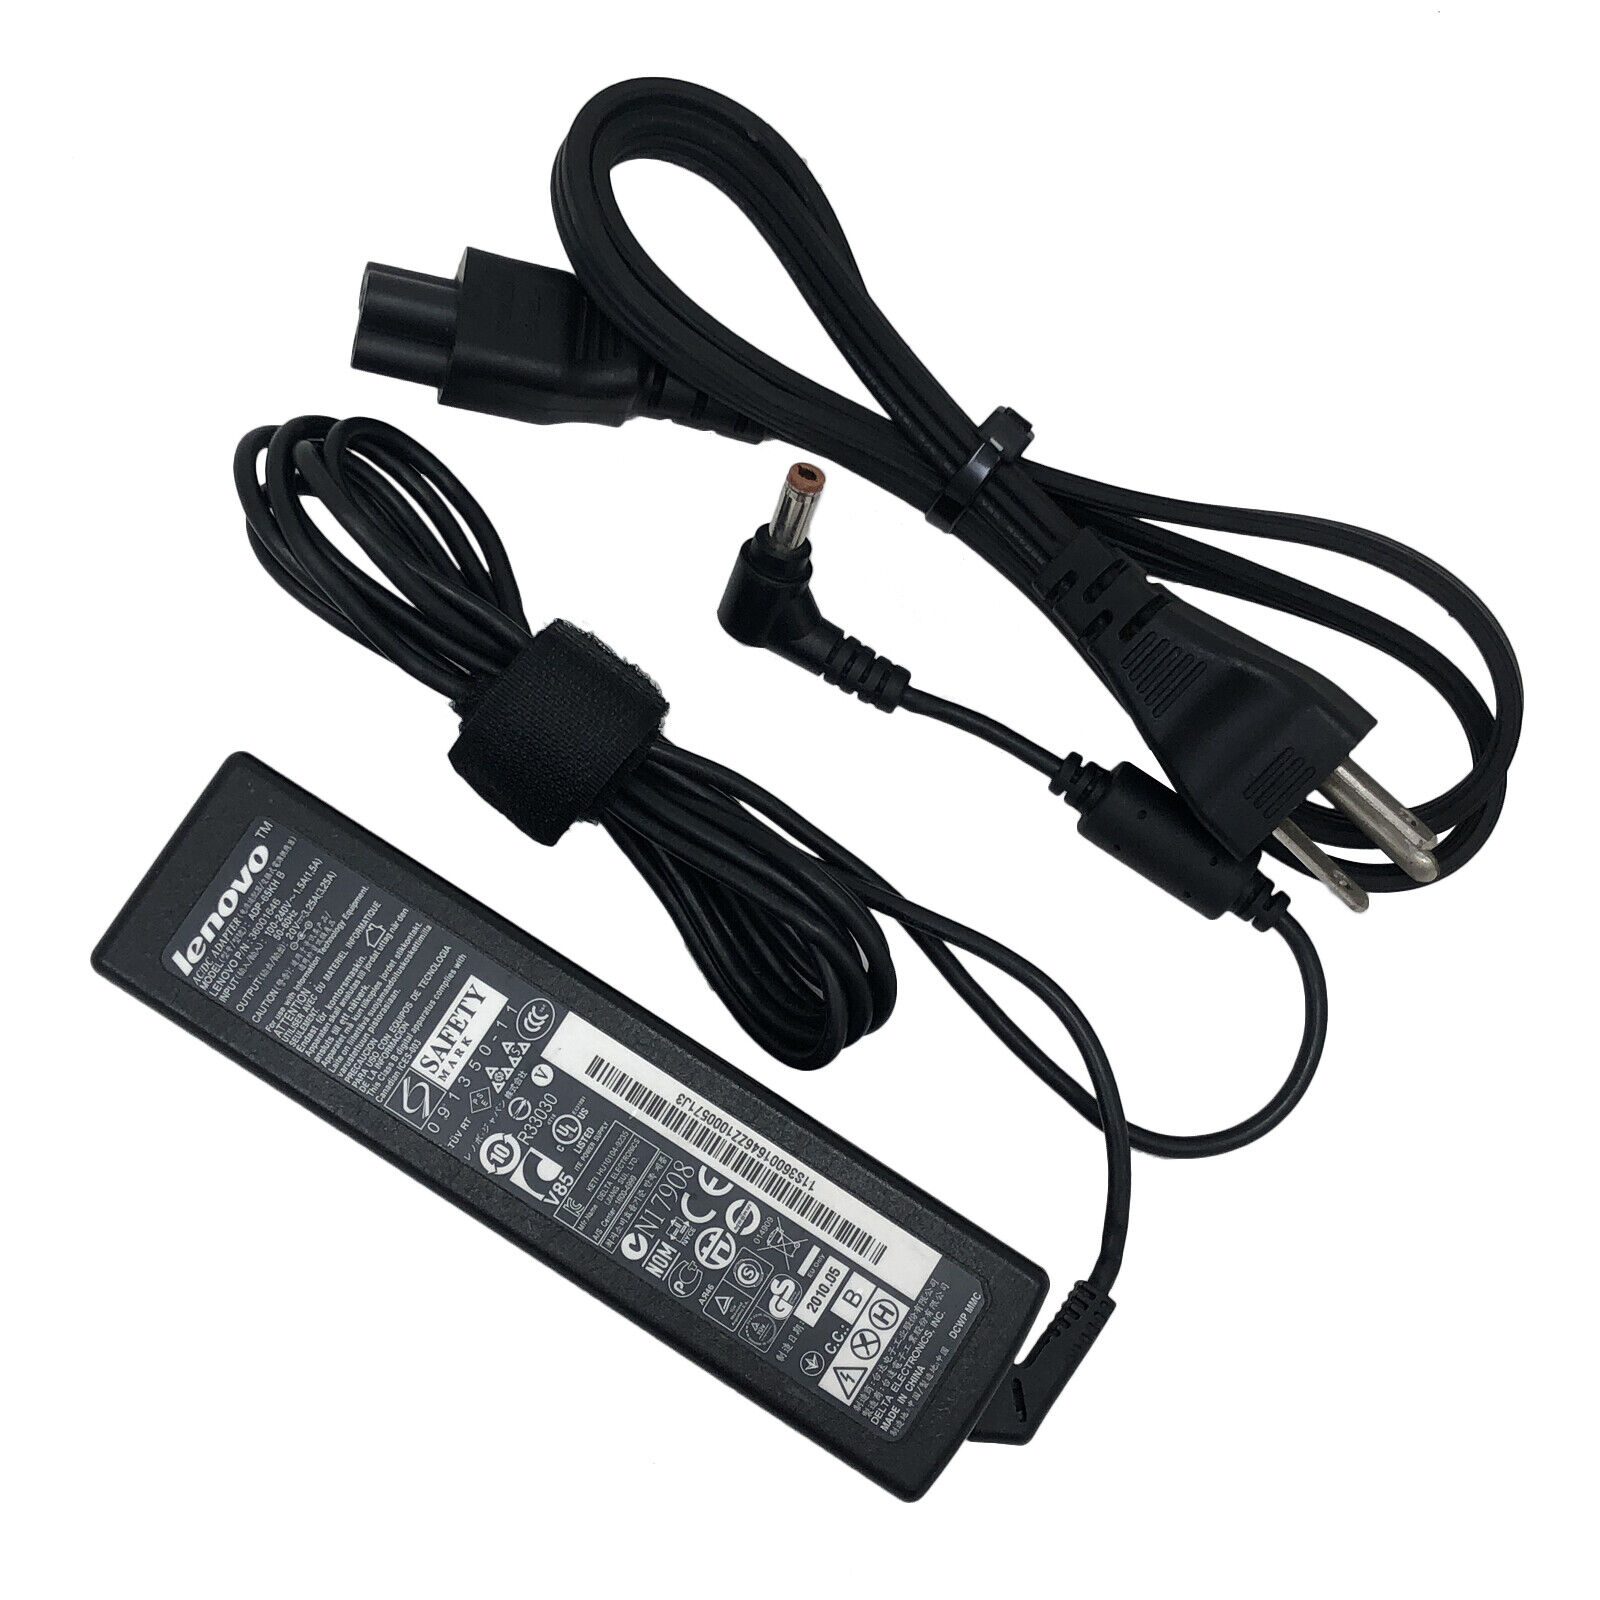 Genuine Lenovo AC/DC Adapter Charger for IdeaPad Touch Laptop Z400 Z500 w/PC